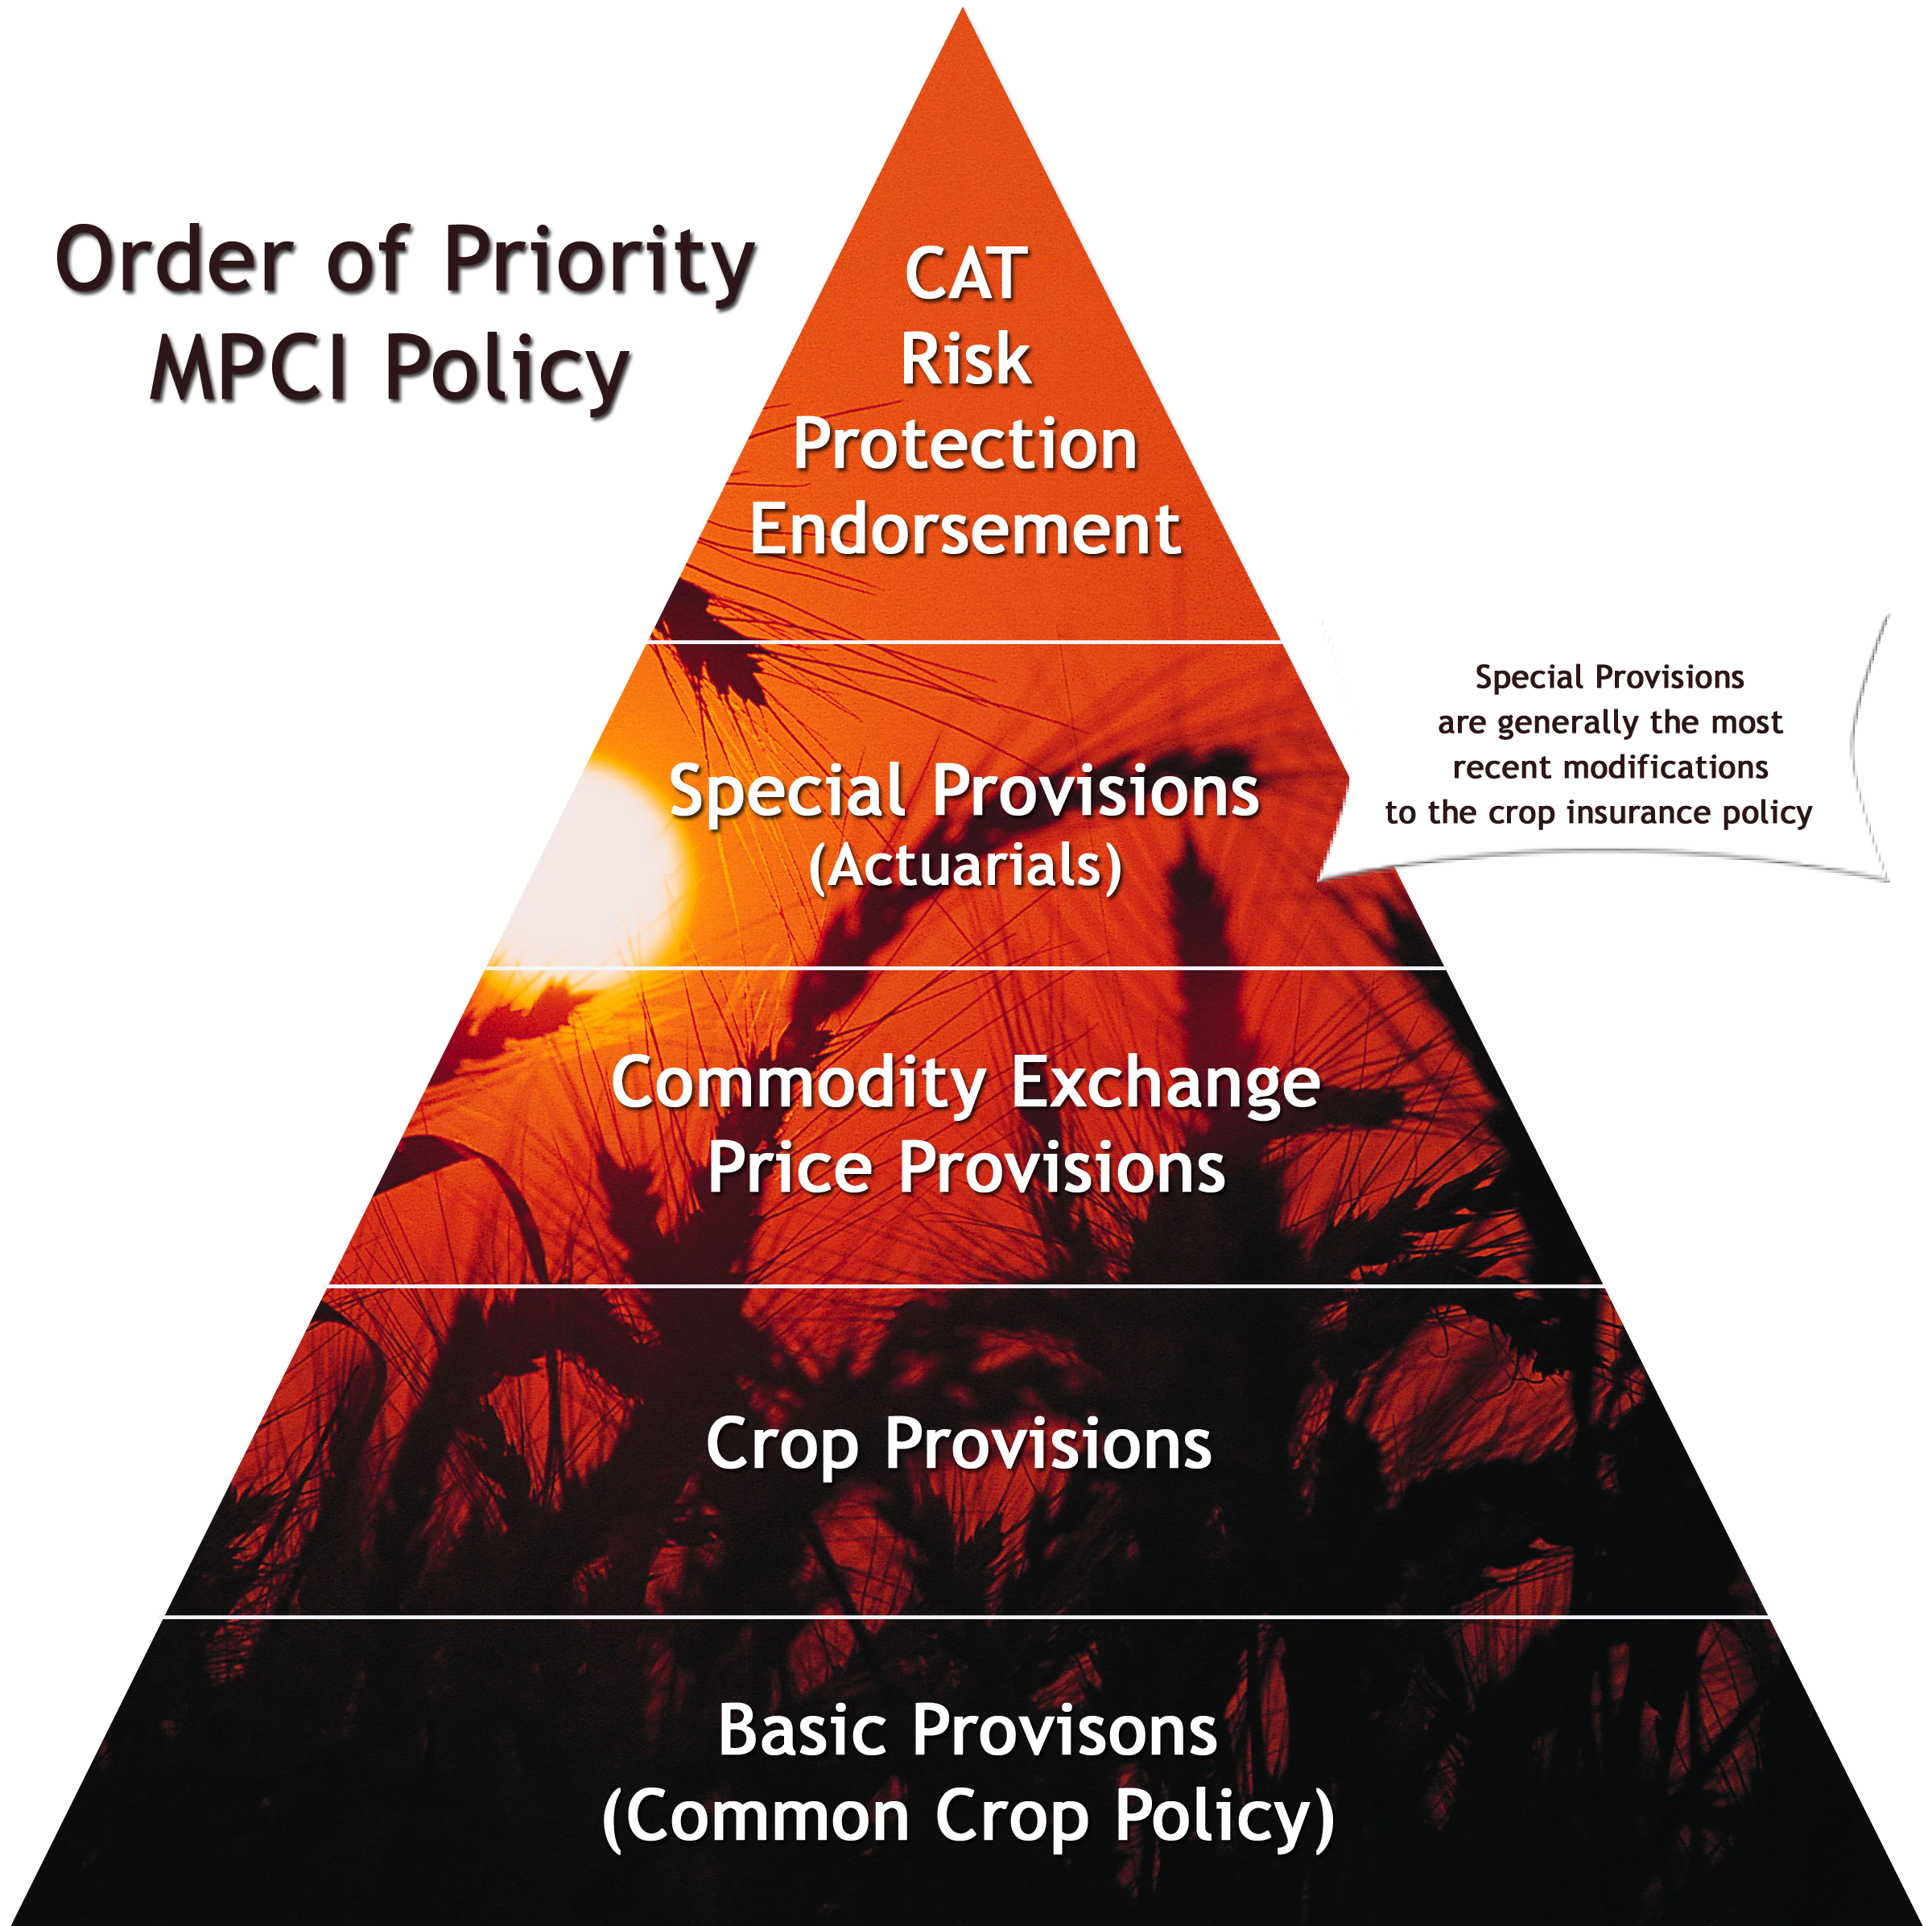 Order of Priority MPCI Policy